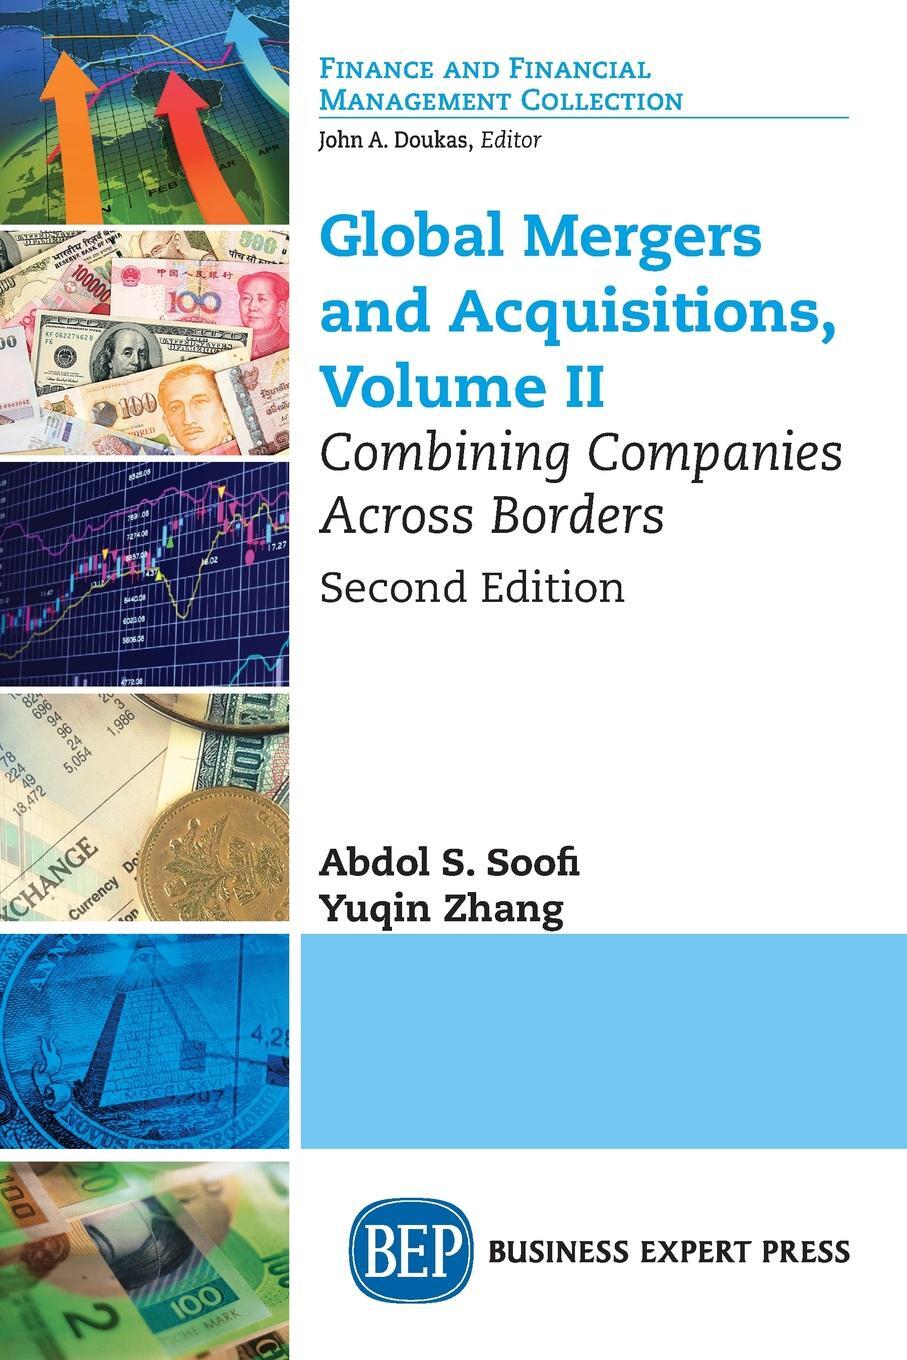 фото Global Mergers and Acquisitions, Volume II. Combining Companies Across Borders, Second Edition